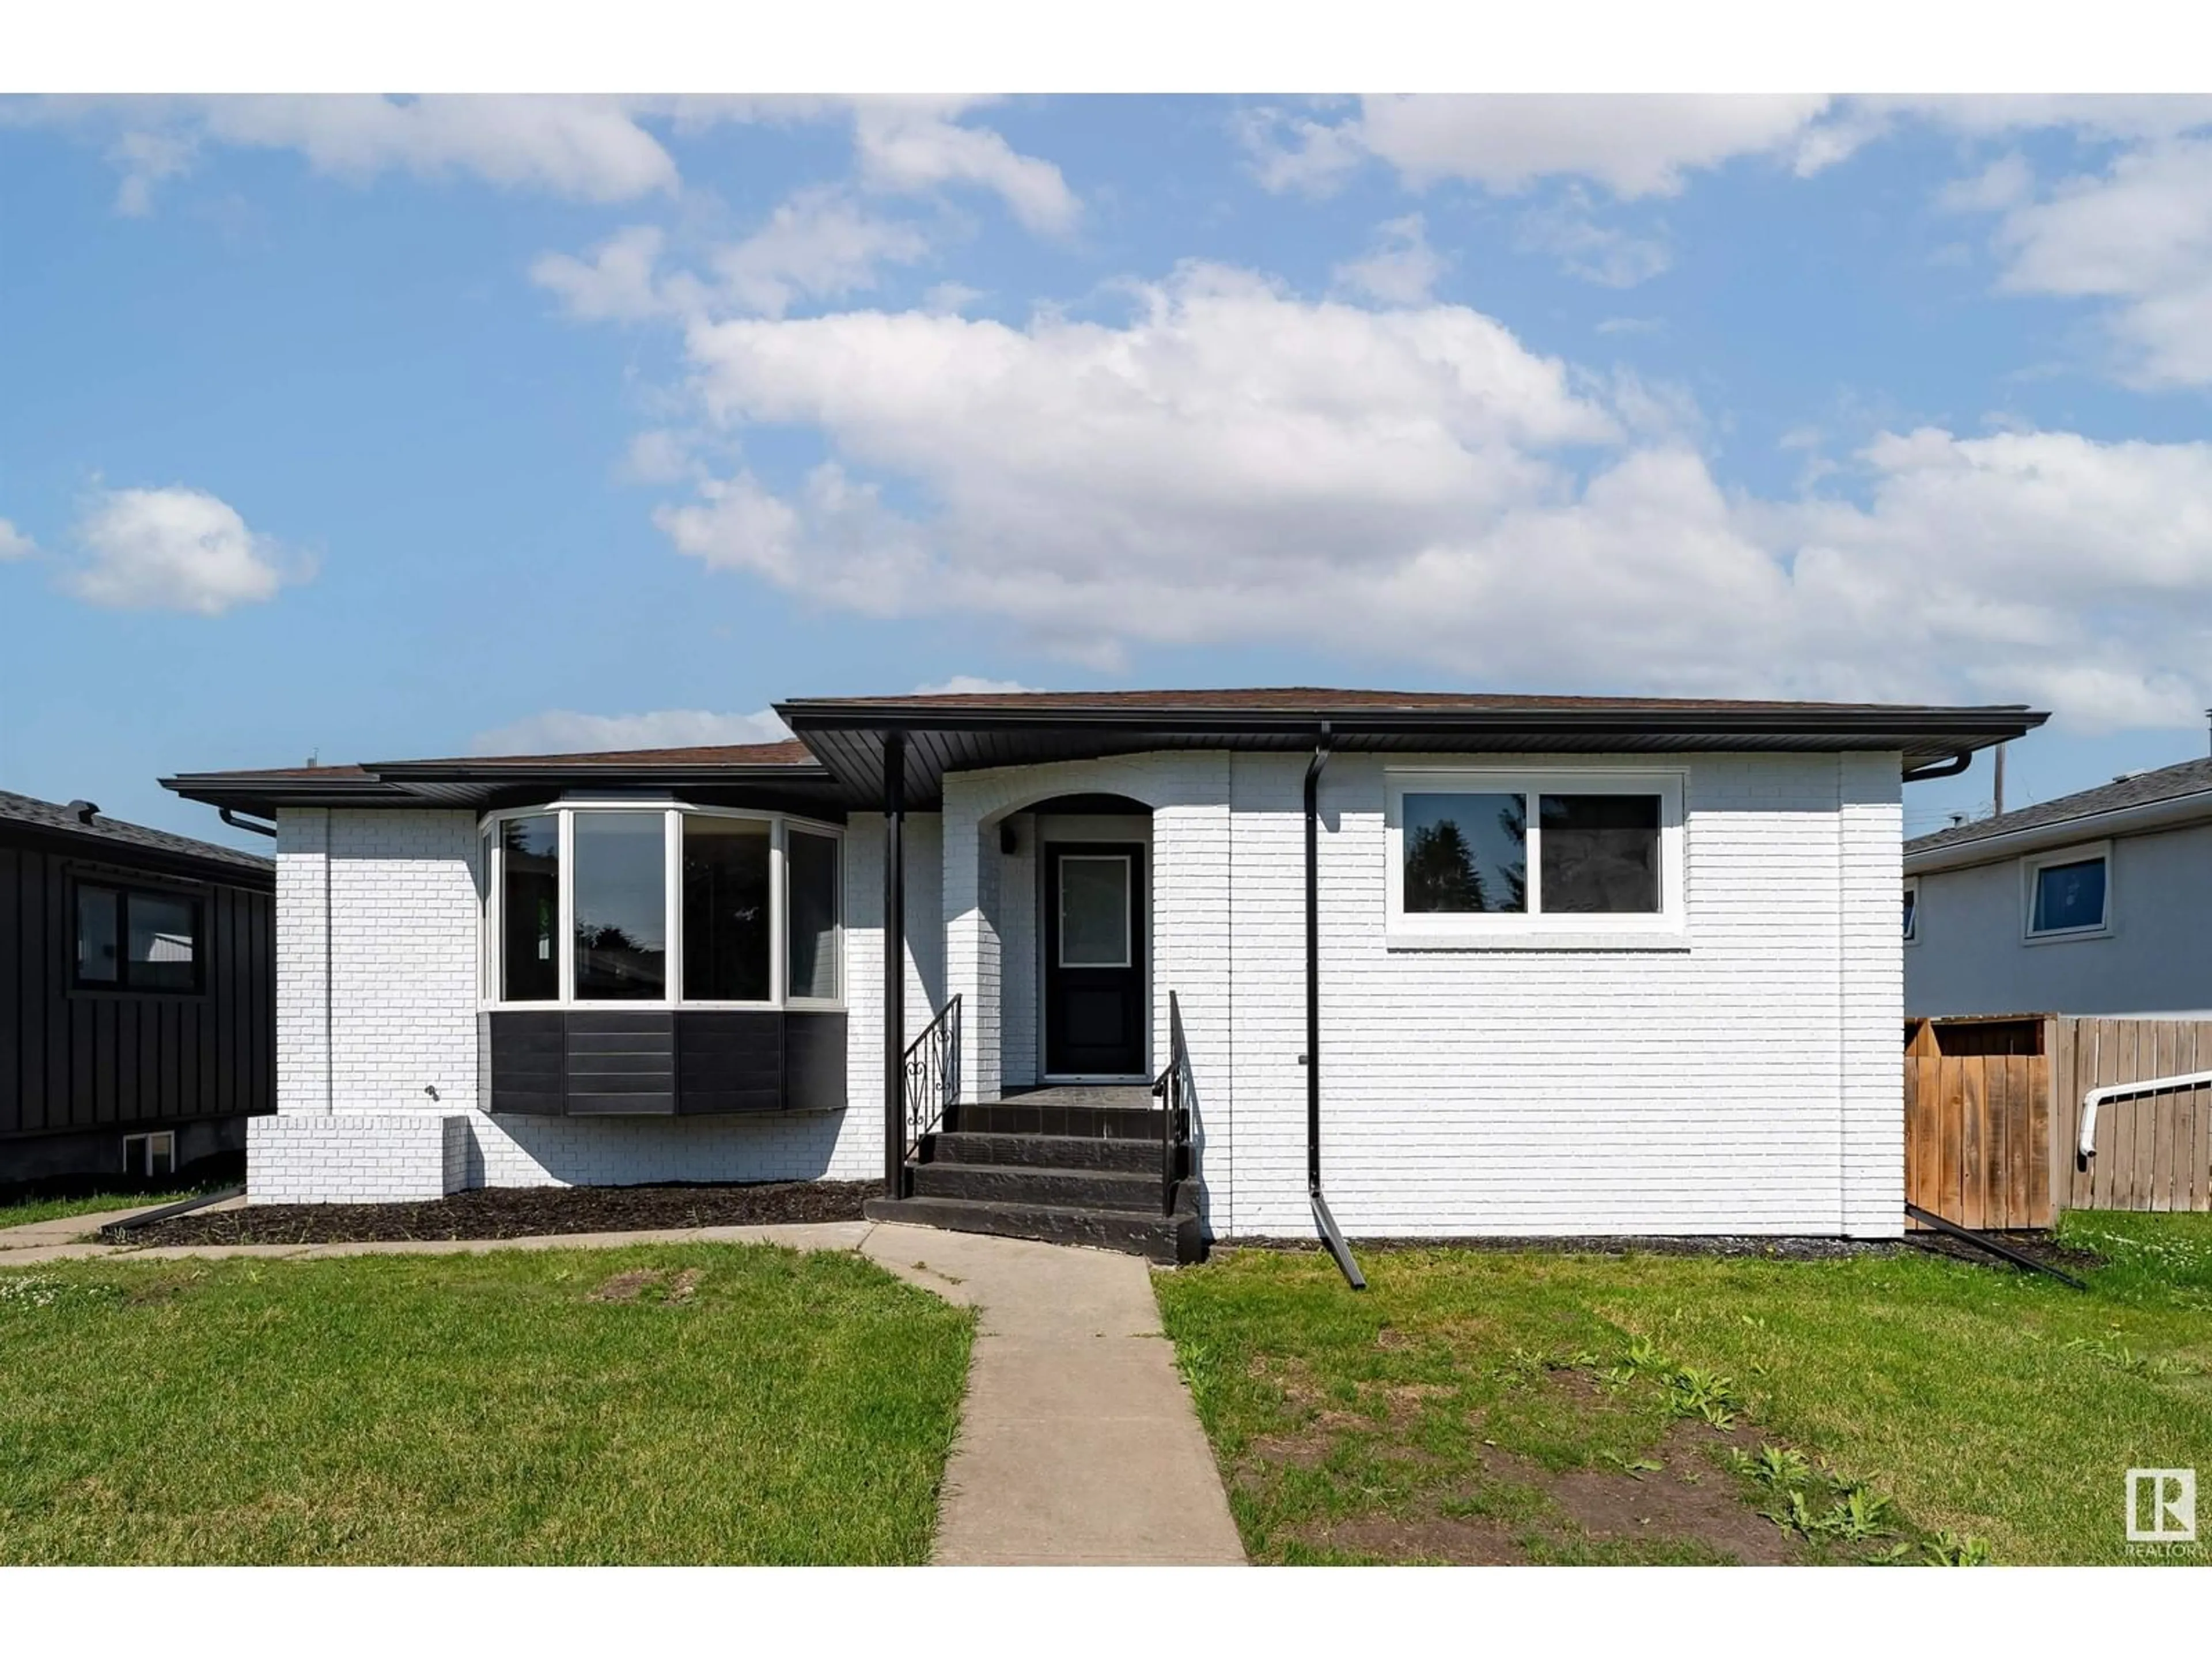 Frontside or backside of a home for 9216 72 ST NW, Edmonton Alberta T6B1Y7